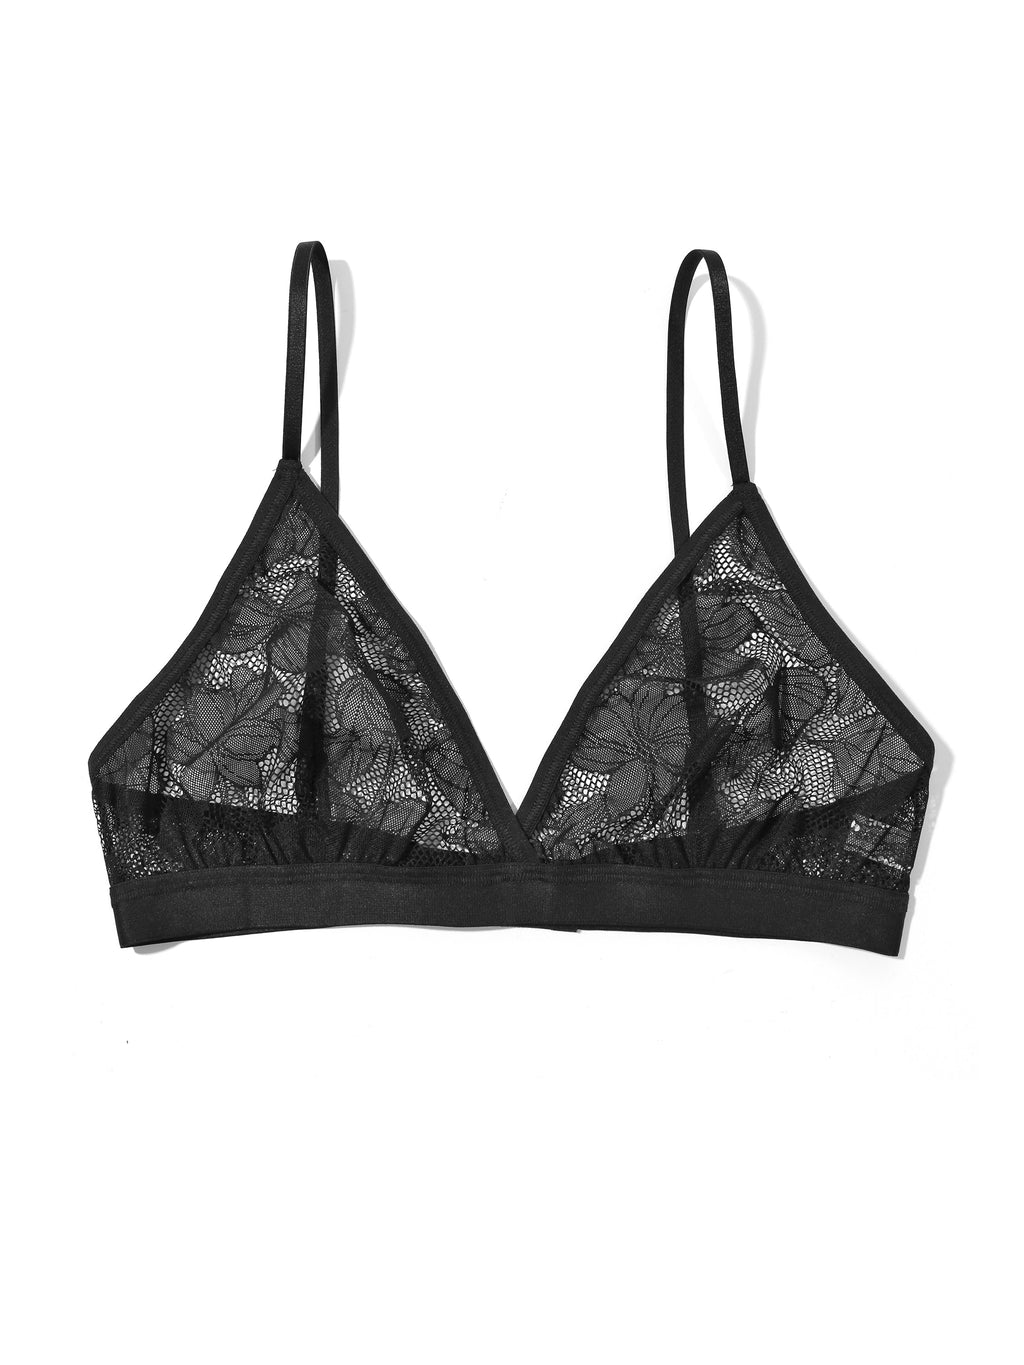 Signature Lace Padded Triangle Bralette Deep Waters Blue